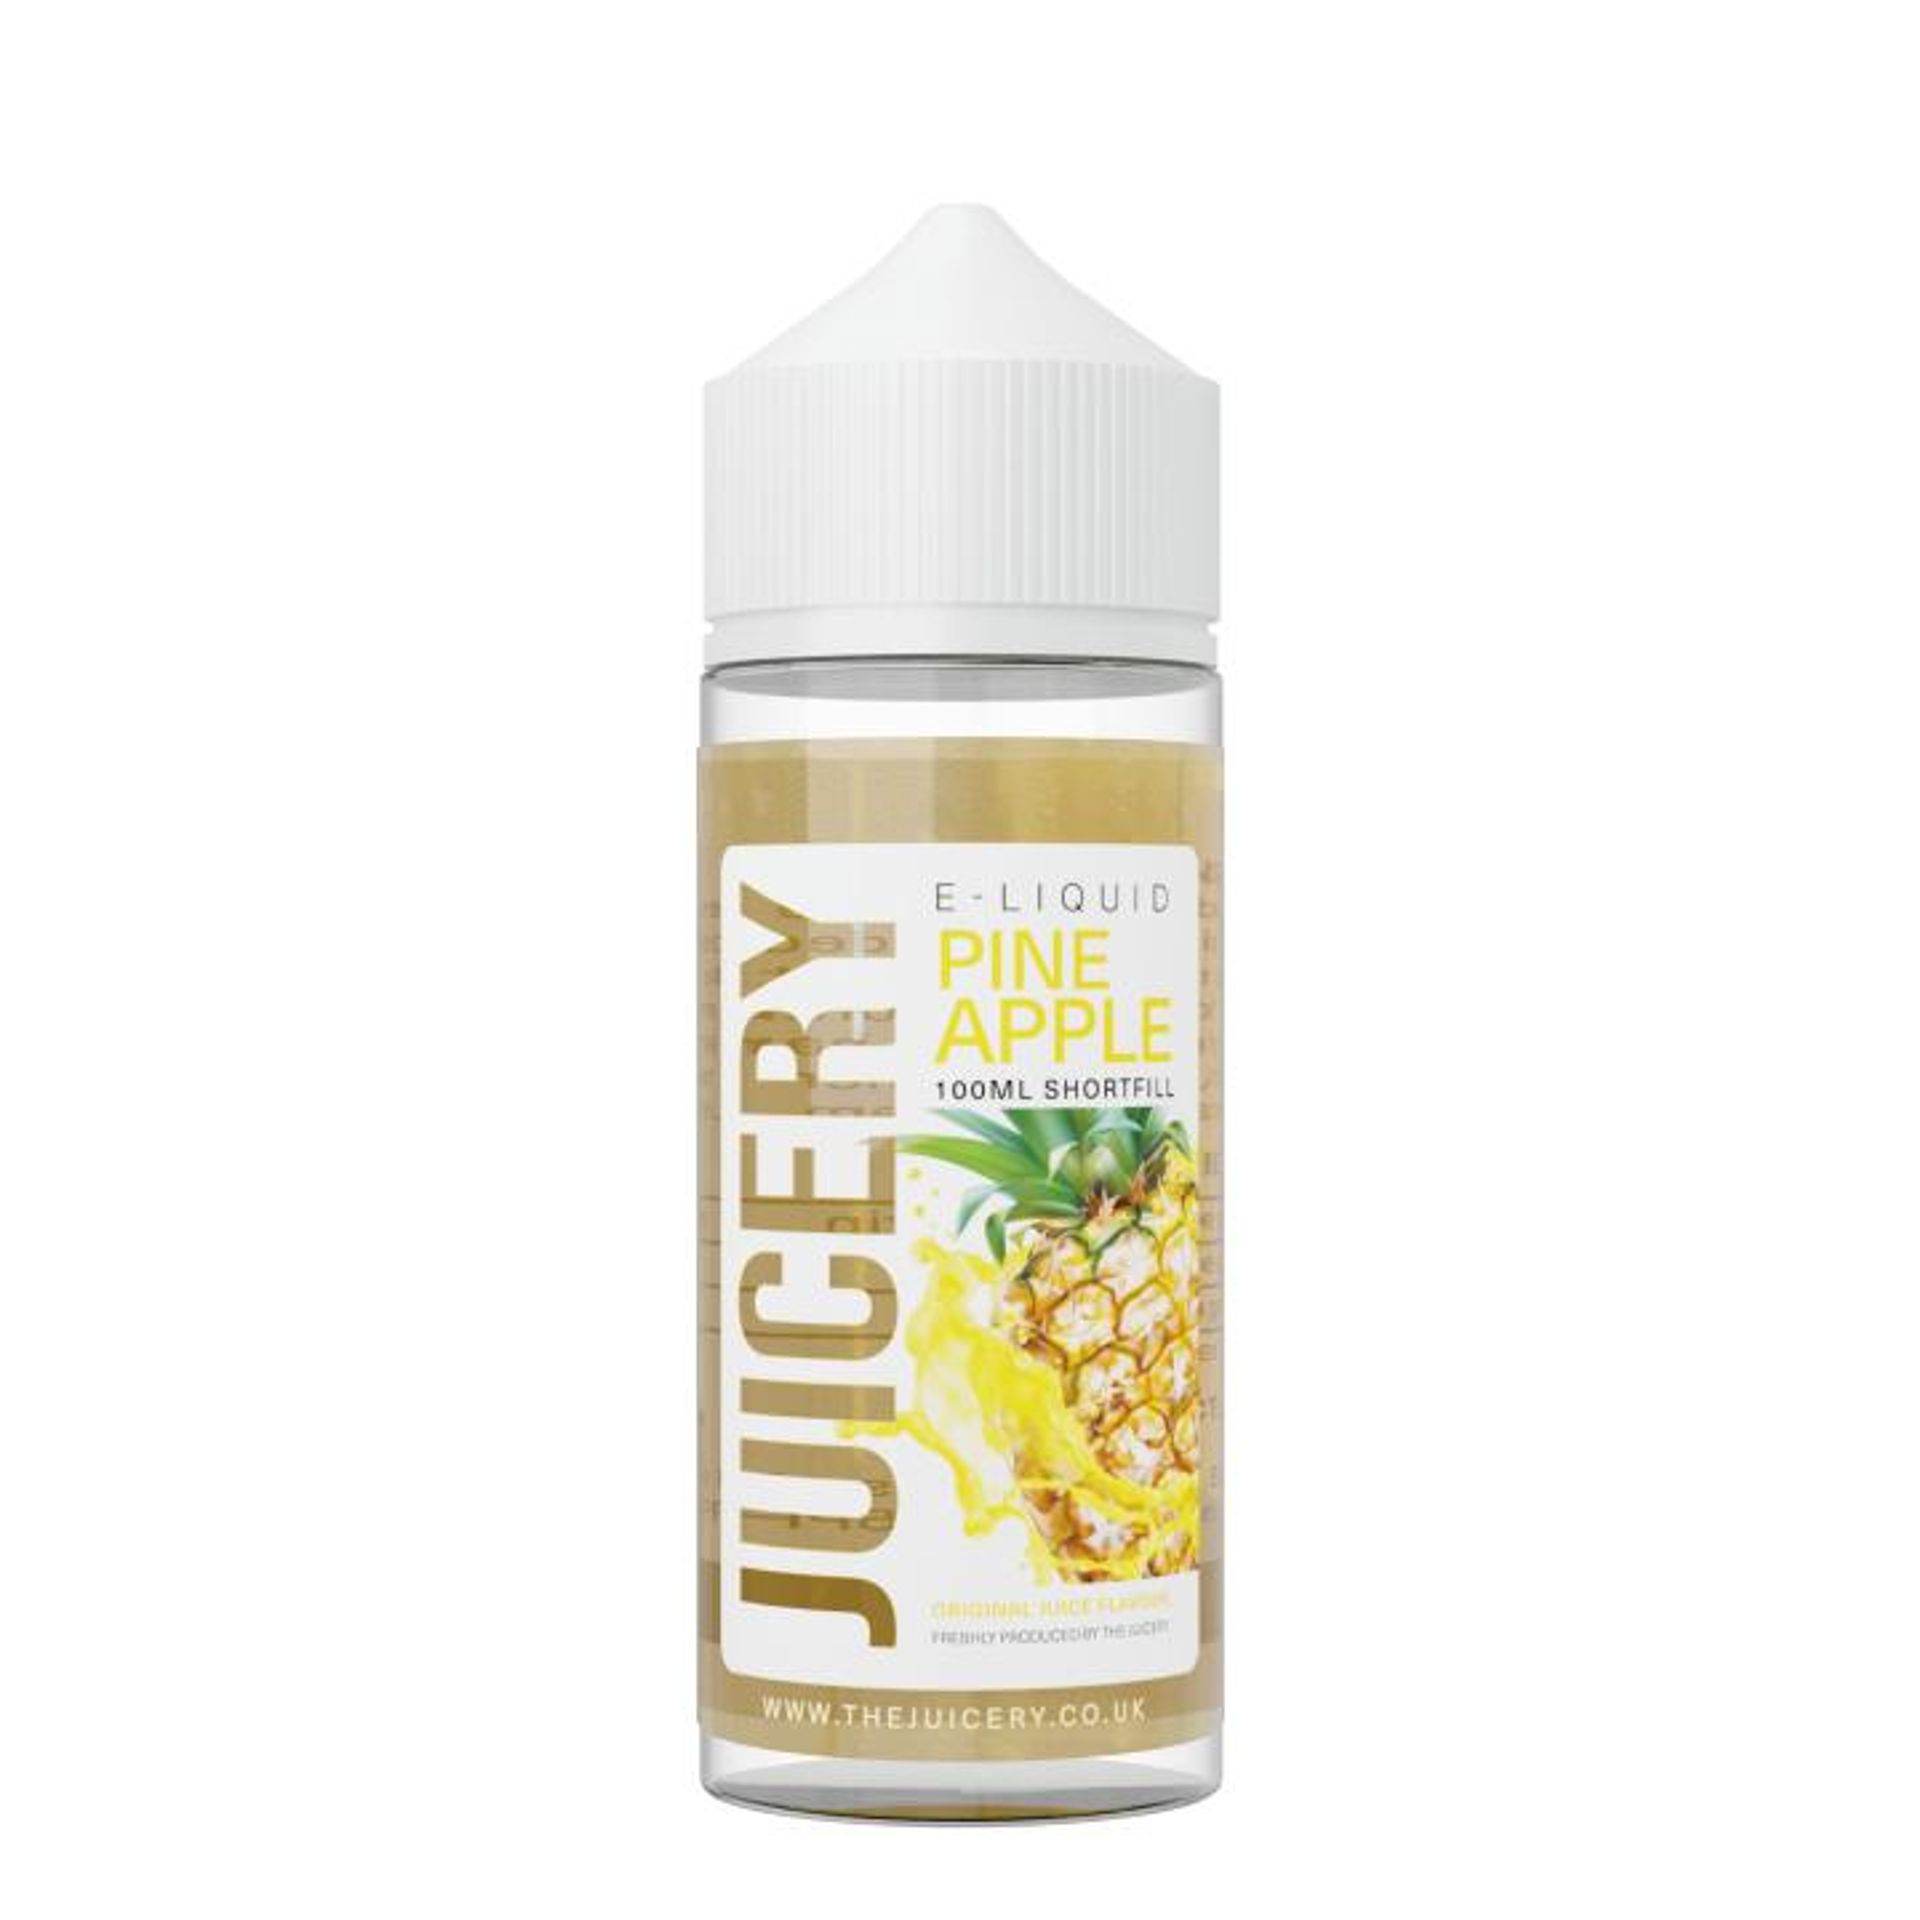 Image of Pineapple by The Juicery